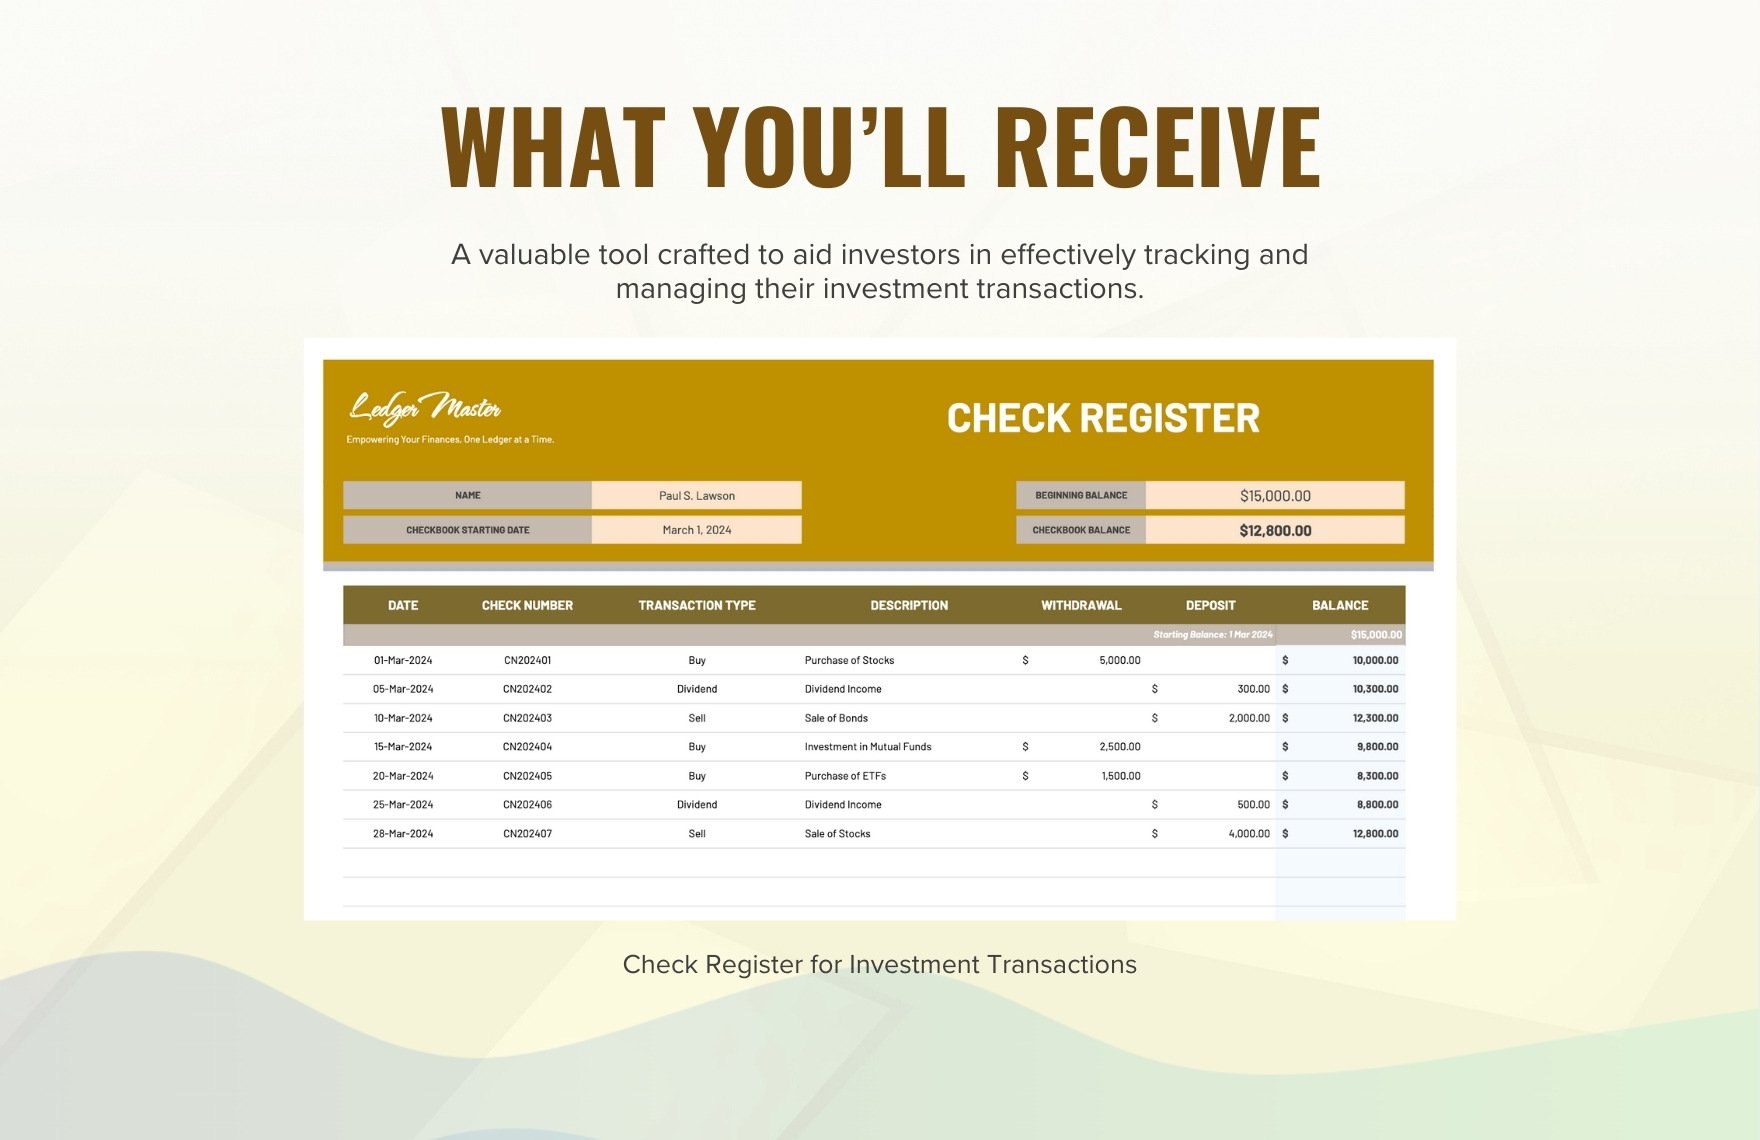 Check Register for Investment Transactions Template